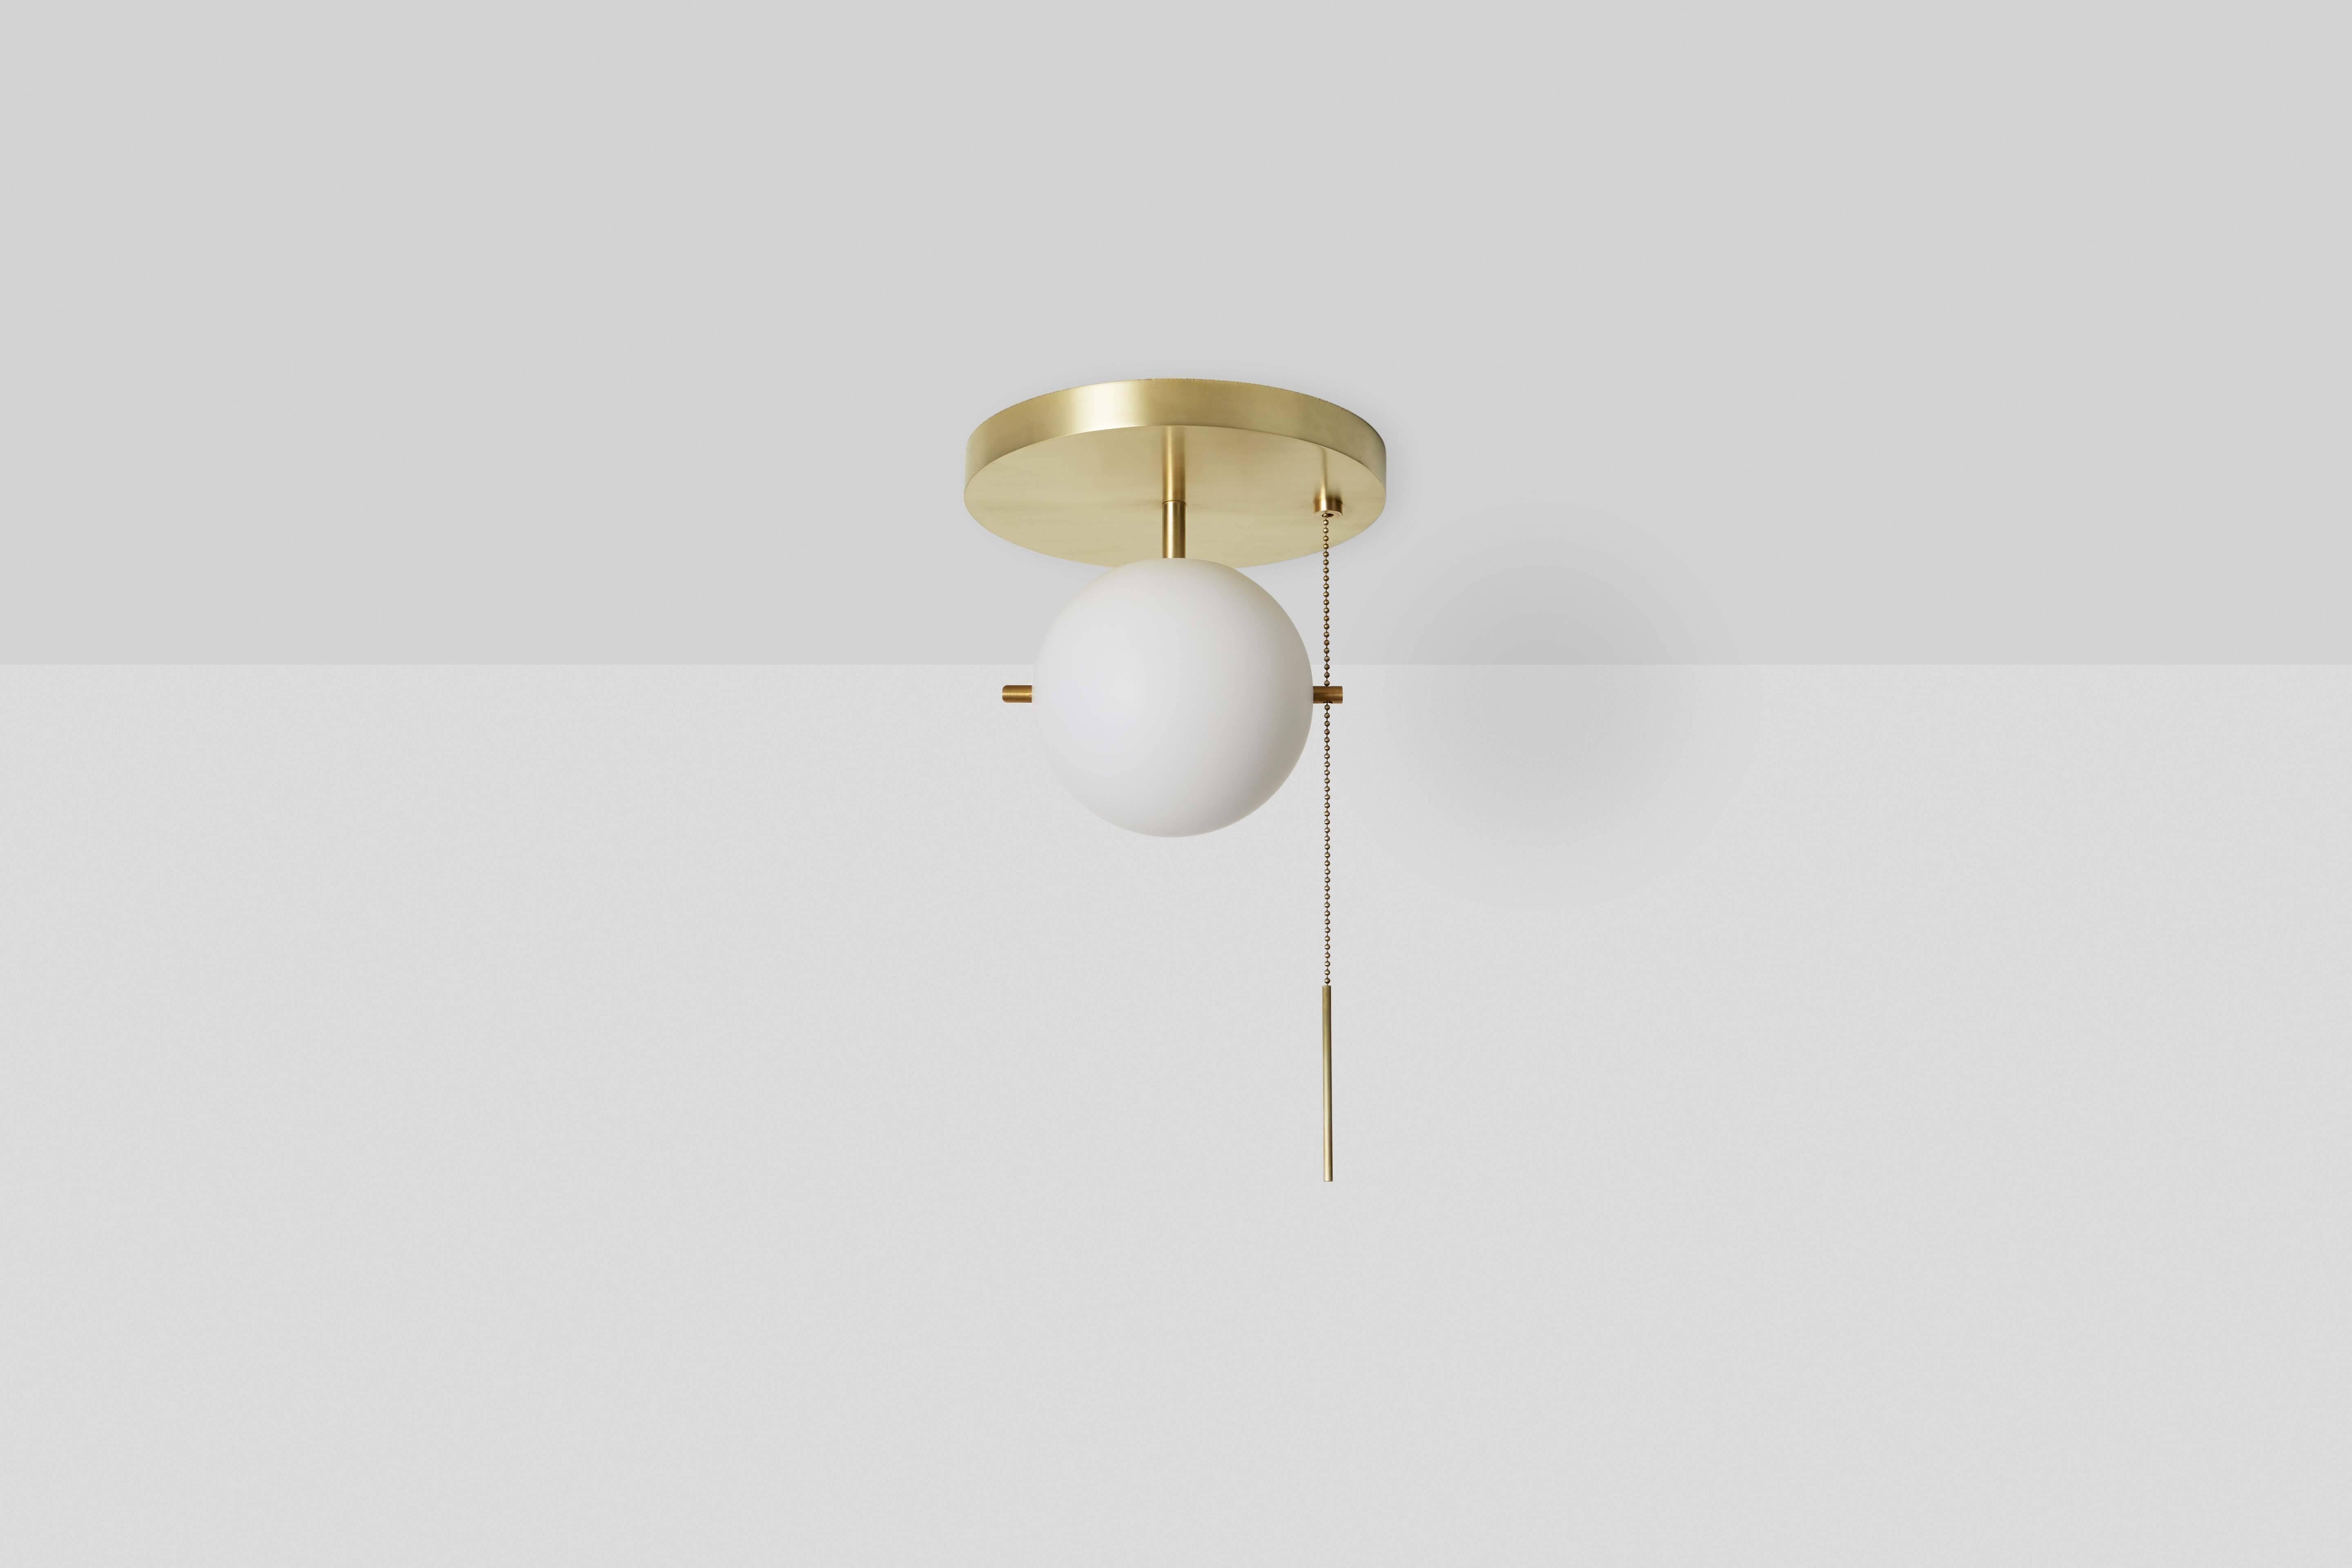 The Flush Mount is a compact beacon composed of metal, glass, and chain. A hand blown glass globe is delicately mounted between two metal pins above a luminous canopy, creating a hieroglyphic composition. The pull chain holds a slender rod, giving